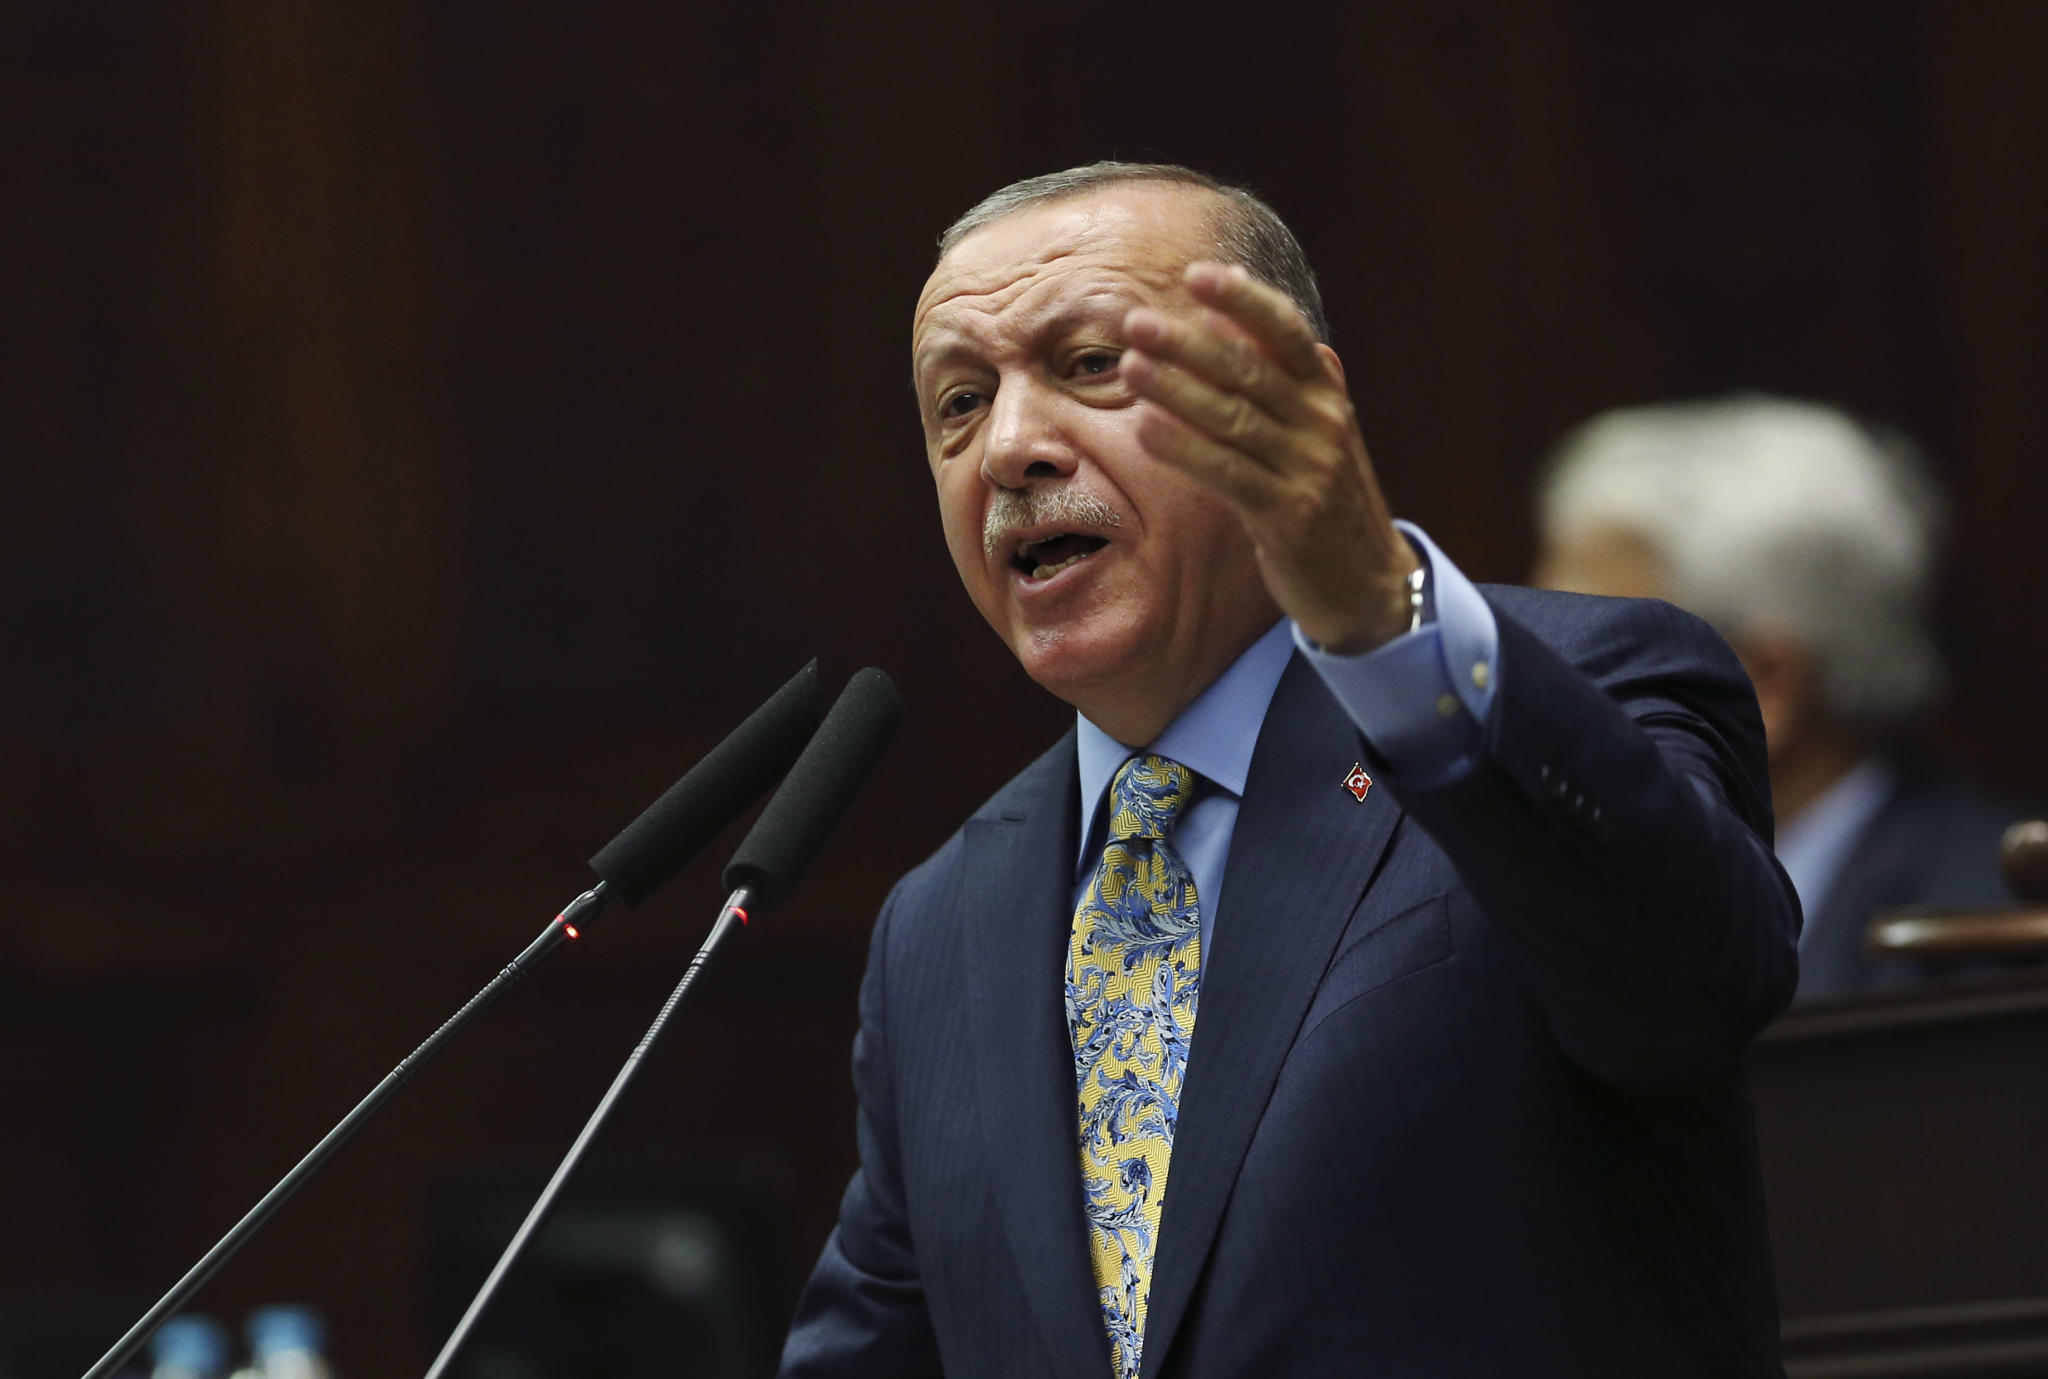 Turkey's President Recep Tayyip Erdogan gestures as he addresses members of his ruling Justice and Development Party (AKP), at the parliament in Ankara, Turkey, Tuesday, Oct. 23, 2018. Turkey's president says Saudi officials started planning to murder Saudi writer Jamal Khashoggi days before his death in Saudi Arabia's Istanbul consulate. (AP Photo/Ali Unal)